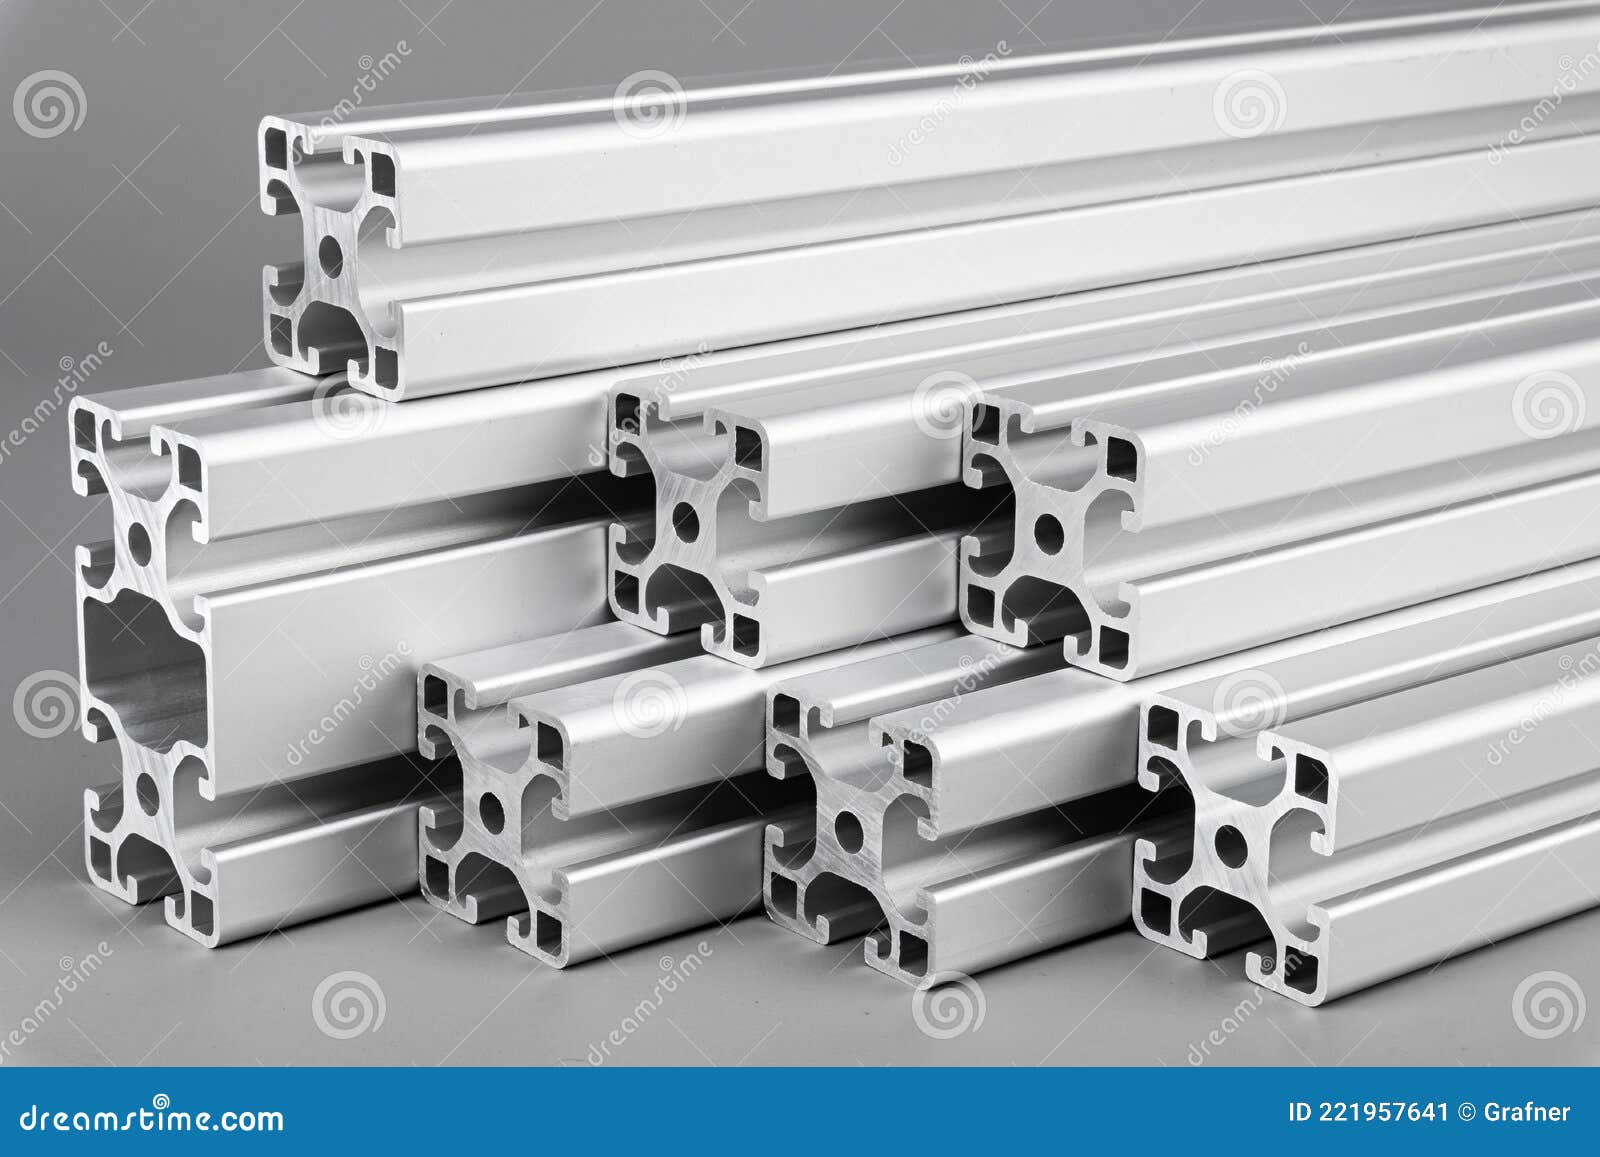 aluminum exstrusion profile bars gray background. metal construction industry engineering and material concept